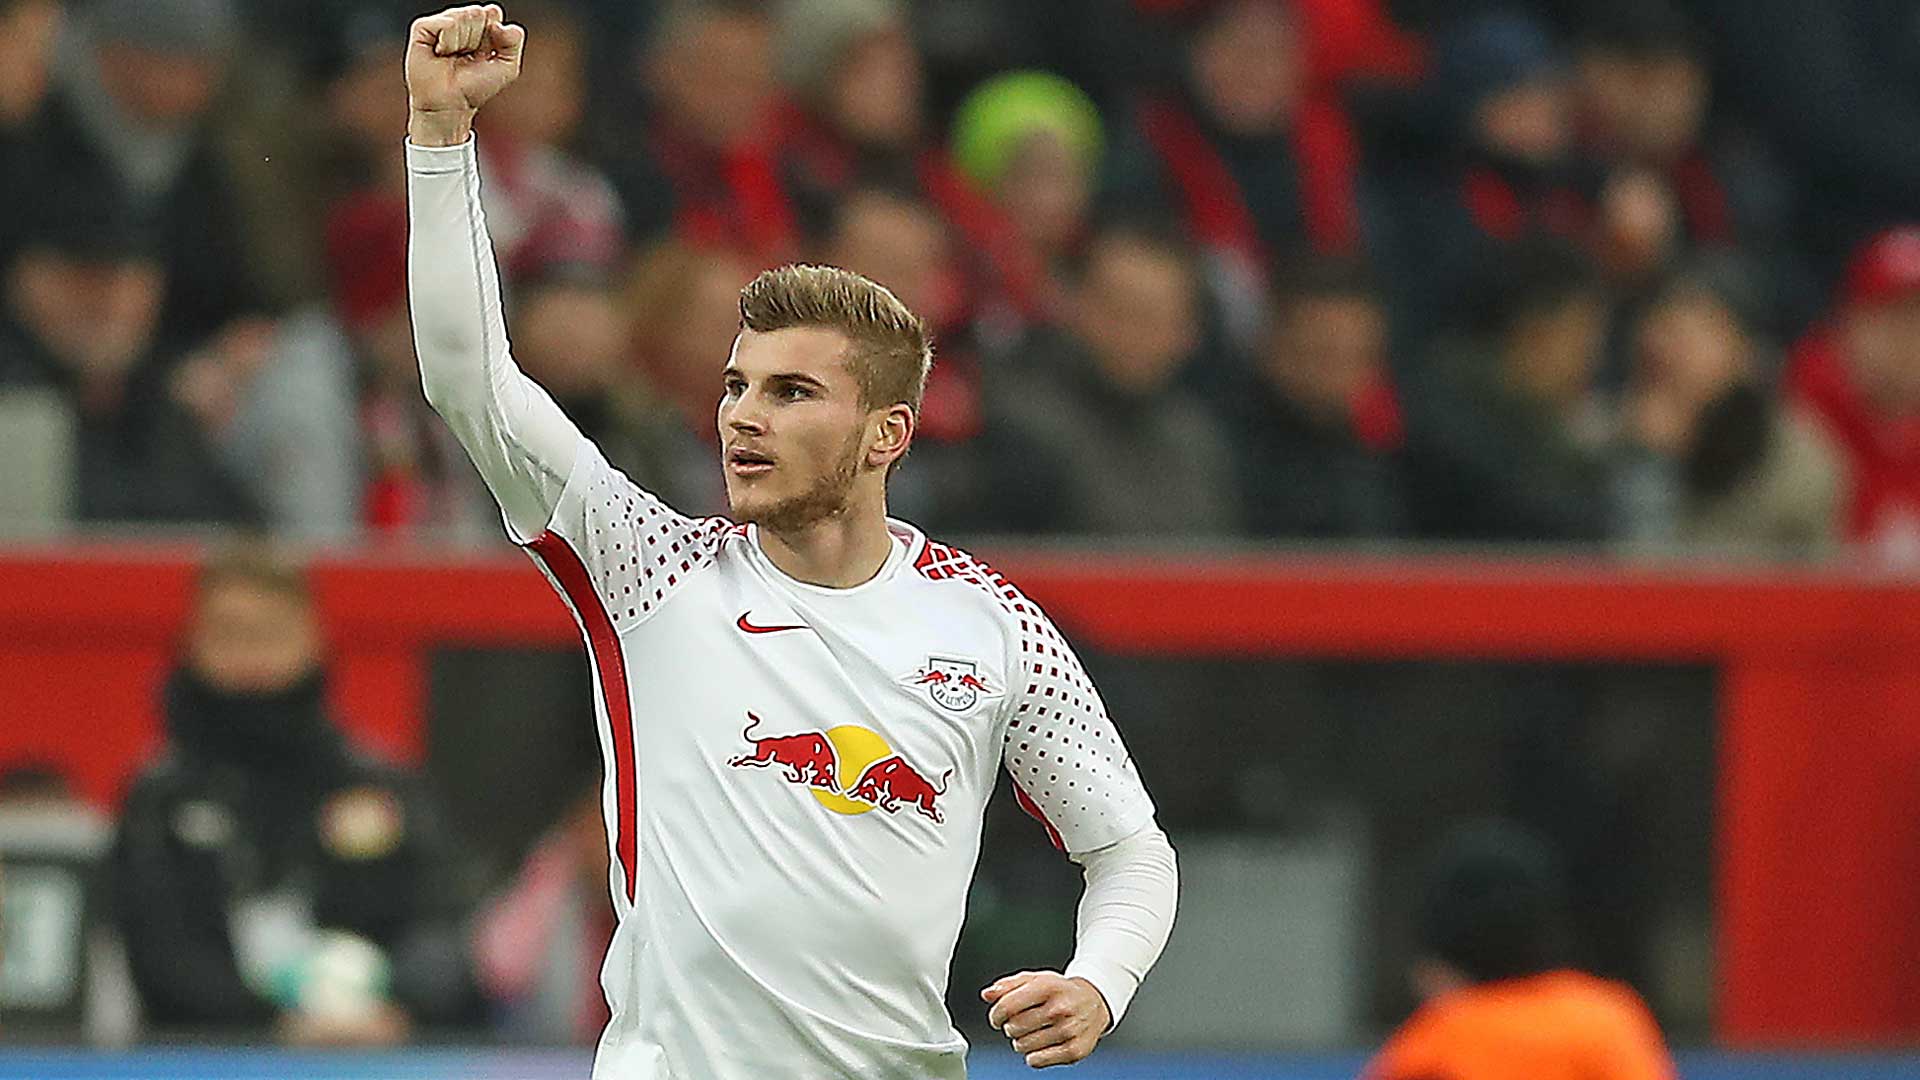 Germany's missing link, RB Leipzig star Timo Werner has the world at